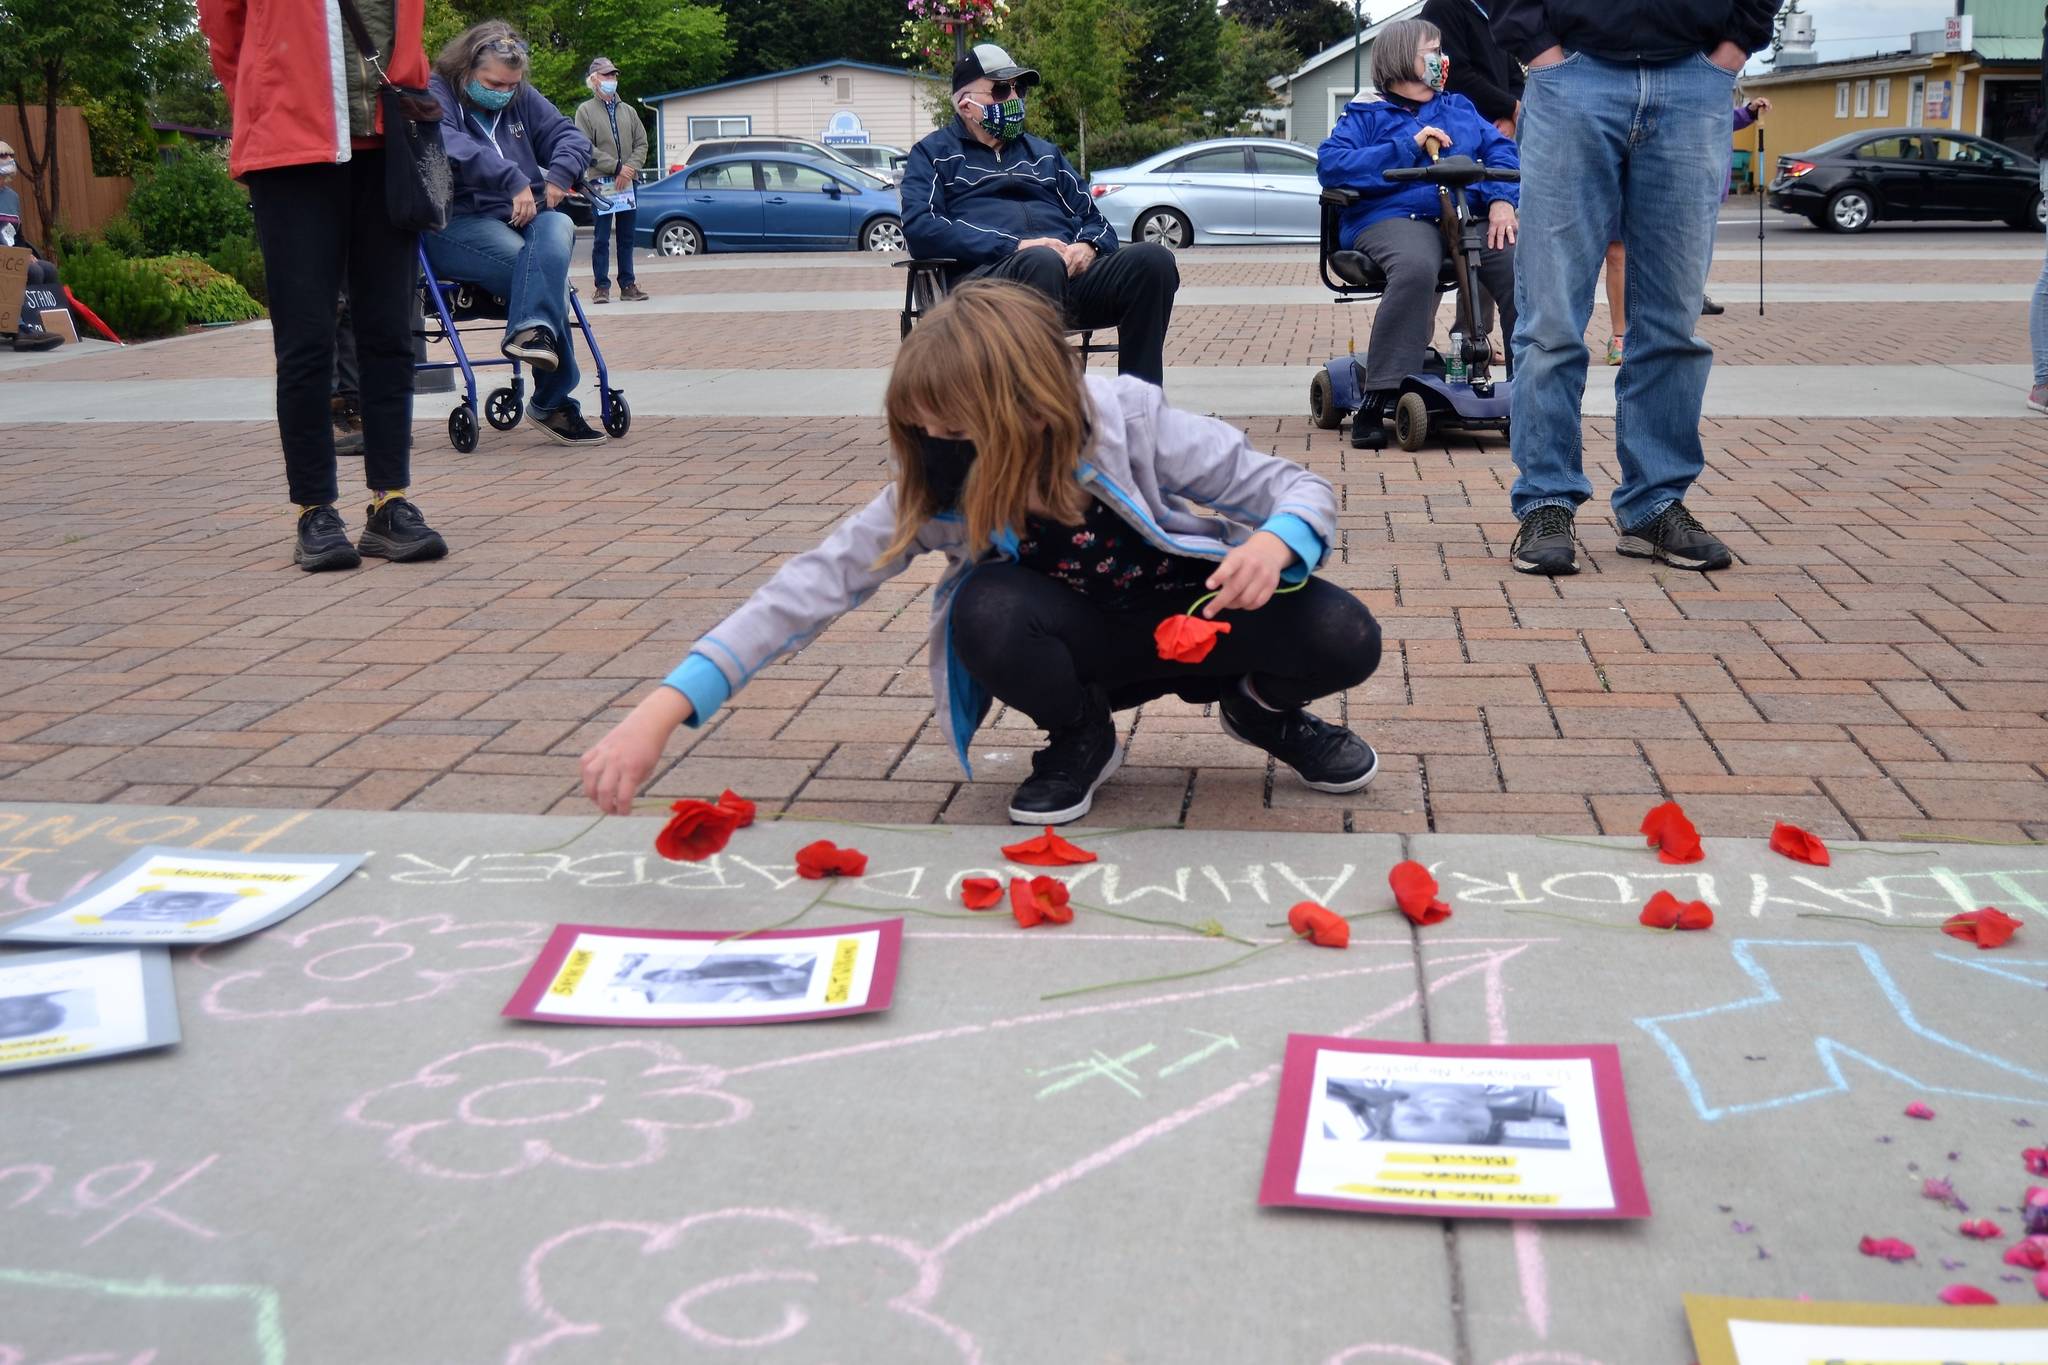 Eleven-year-old Maisy French of Sequim places flowers down by pictures of black people victimized by police brutality on June 5 at the Sequim Civic Center. She participated in the vigil with her parents and brother with her mom Tammy saying they participated because they wanted to make sure something is done about the violence occurring in the nation.